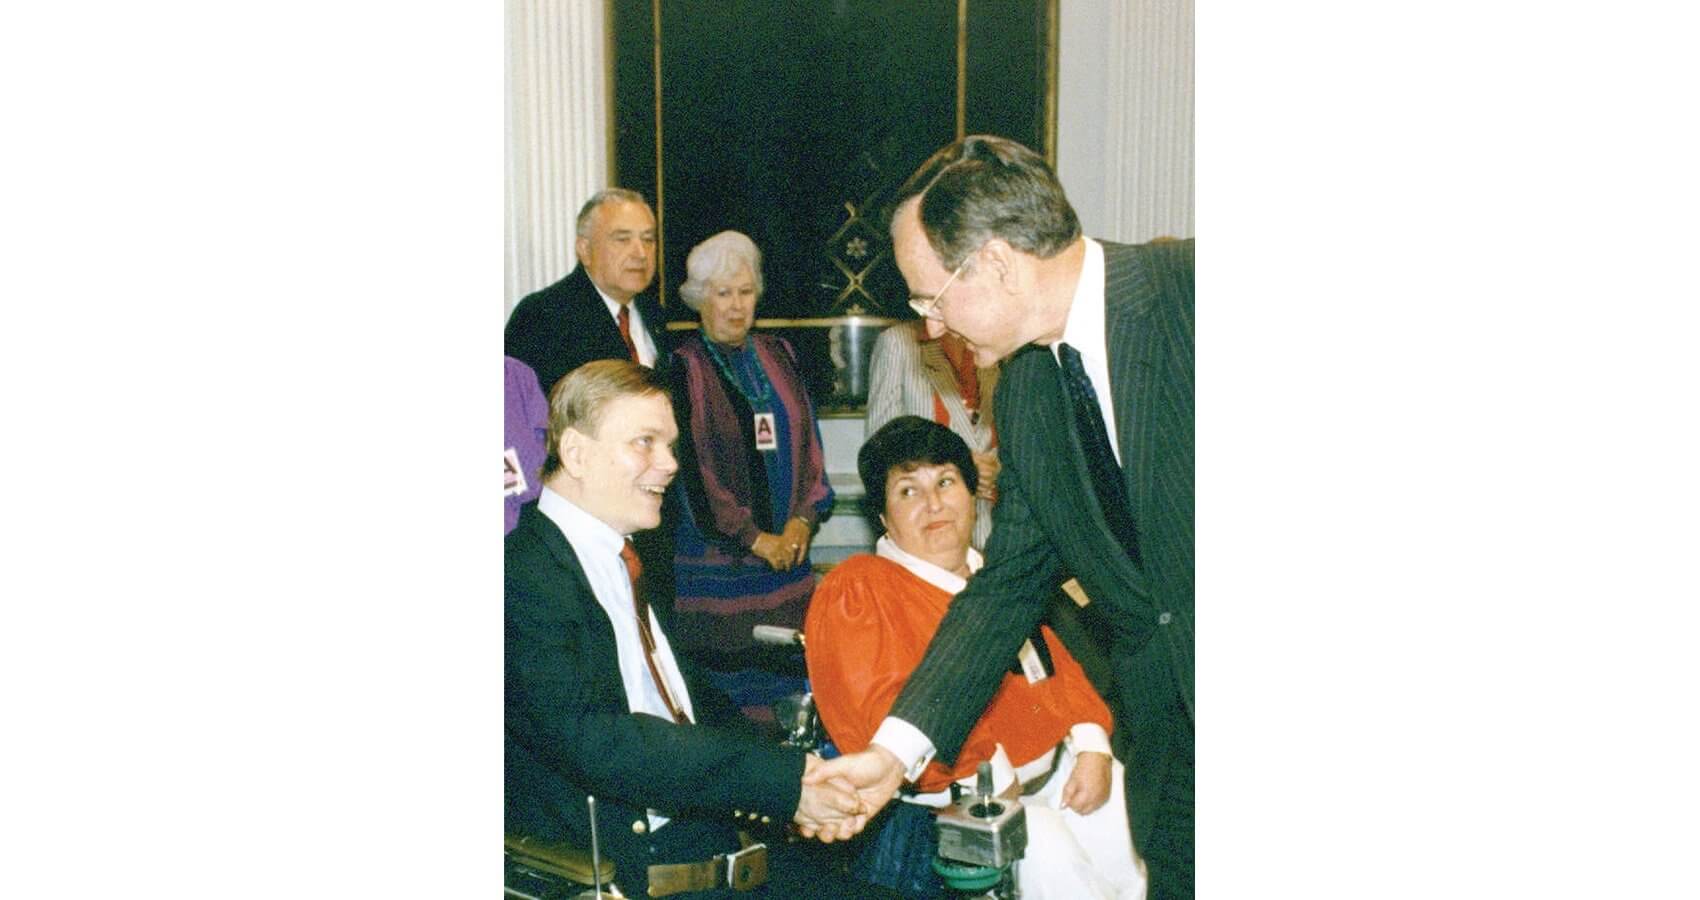 Vice President George H.W. Bush greets Frieden at the White House in 1984. (Credit: Lex Frieden)